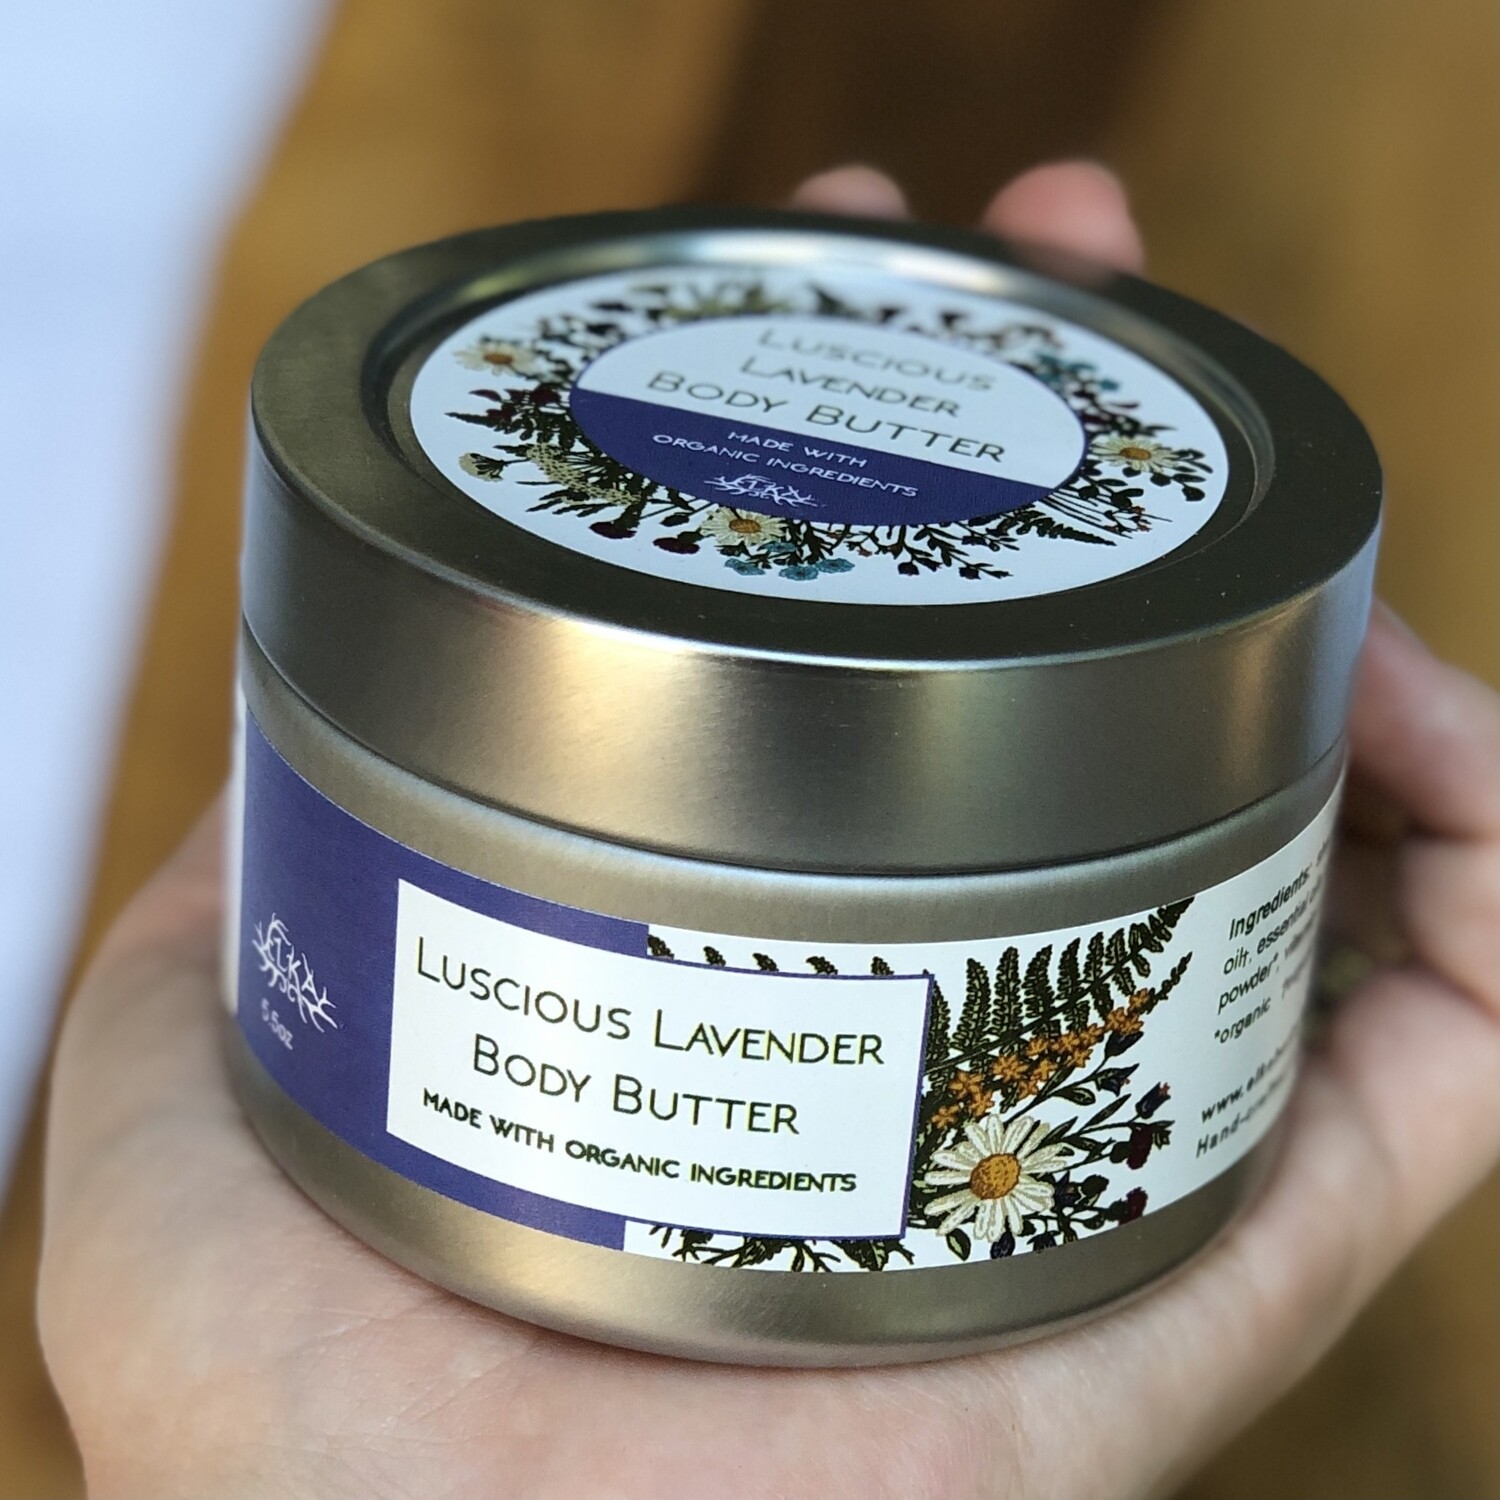 Luscious Lavender Body Butter